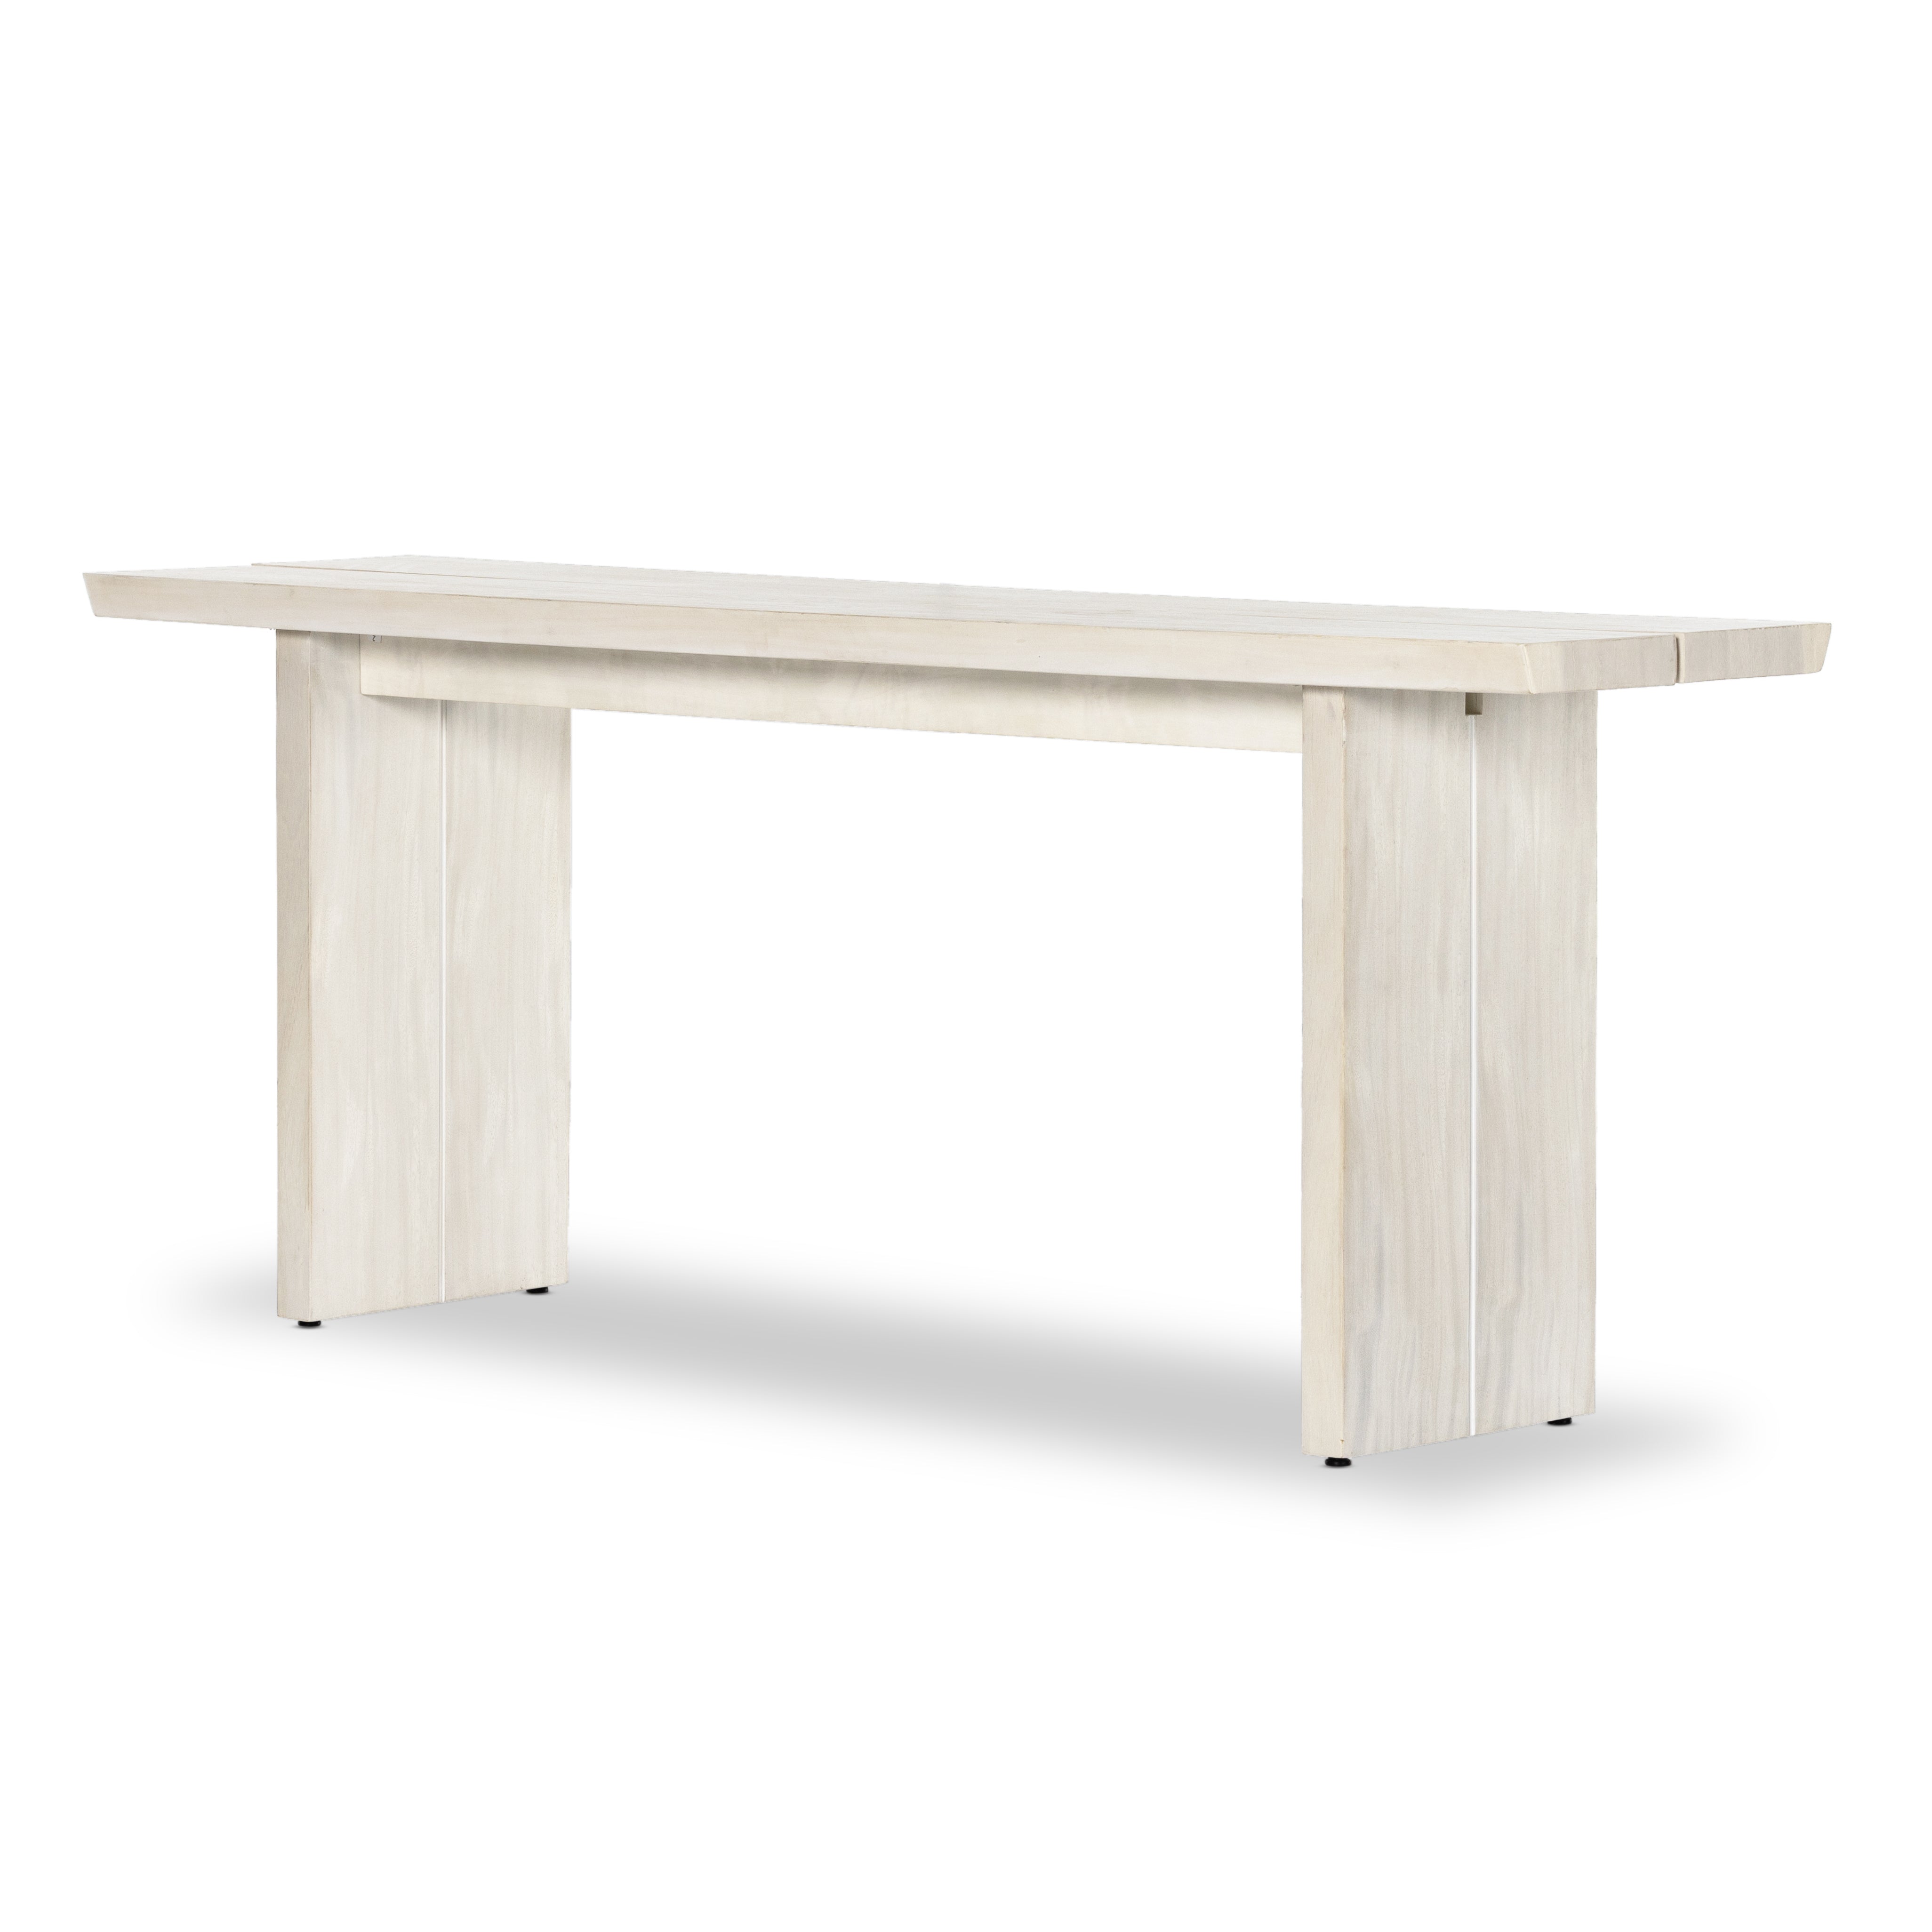 Made from bleached Guanacaste, a minimalist console table features live edging and split slab detailing. Light in look and finish, for versatility in any space or style. Amethyst Home provides interior design, new construction, custom furniture and area rugs in the Calabasas metro area